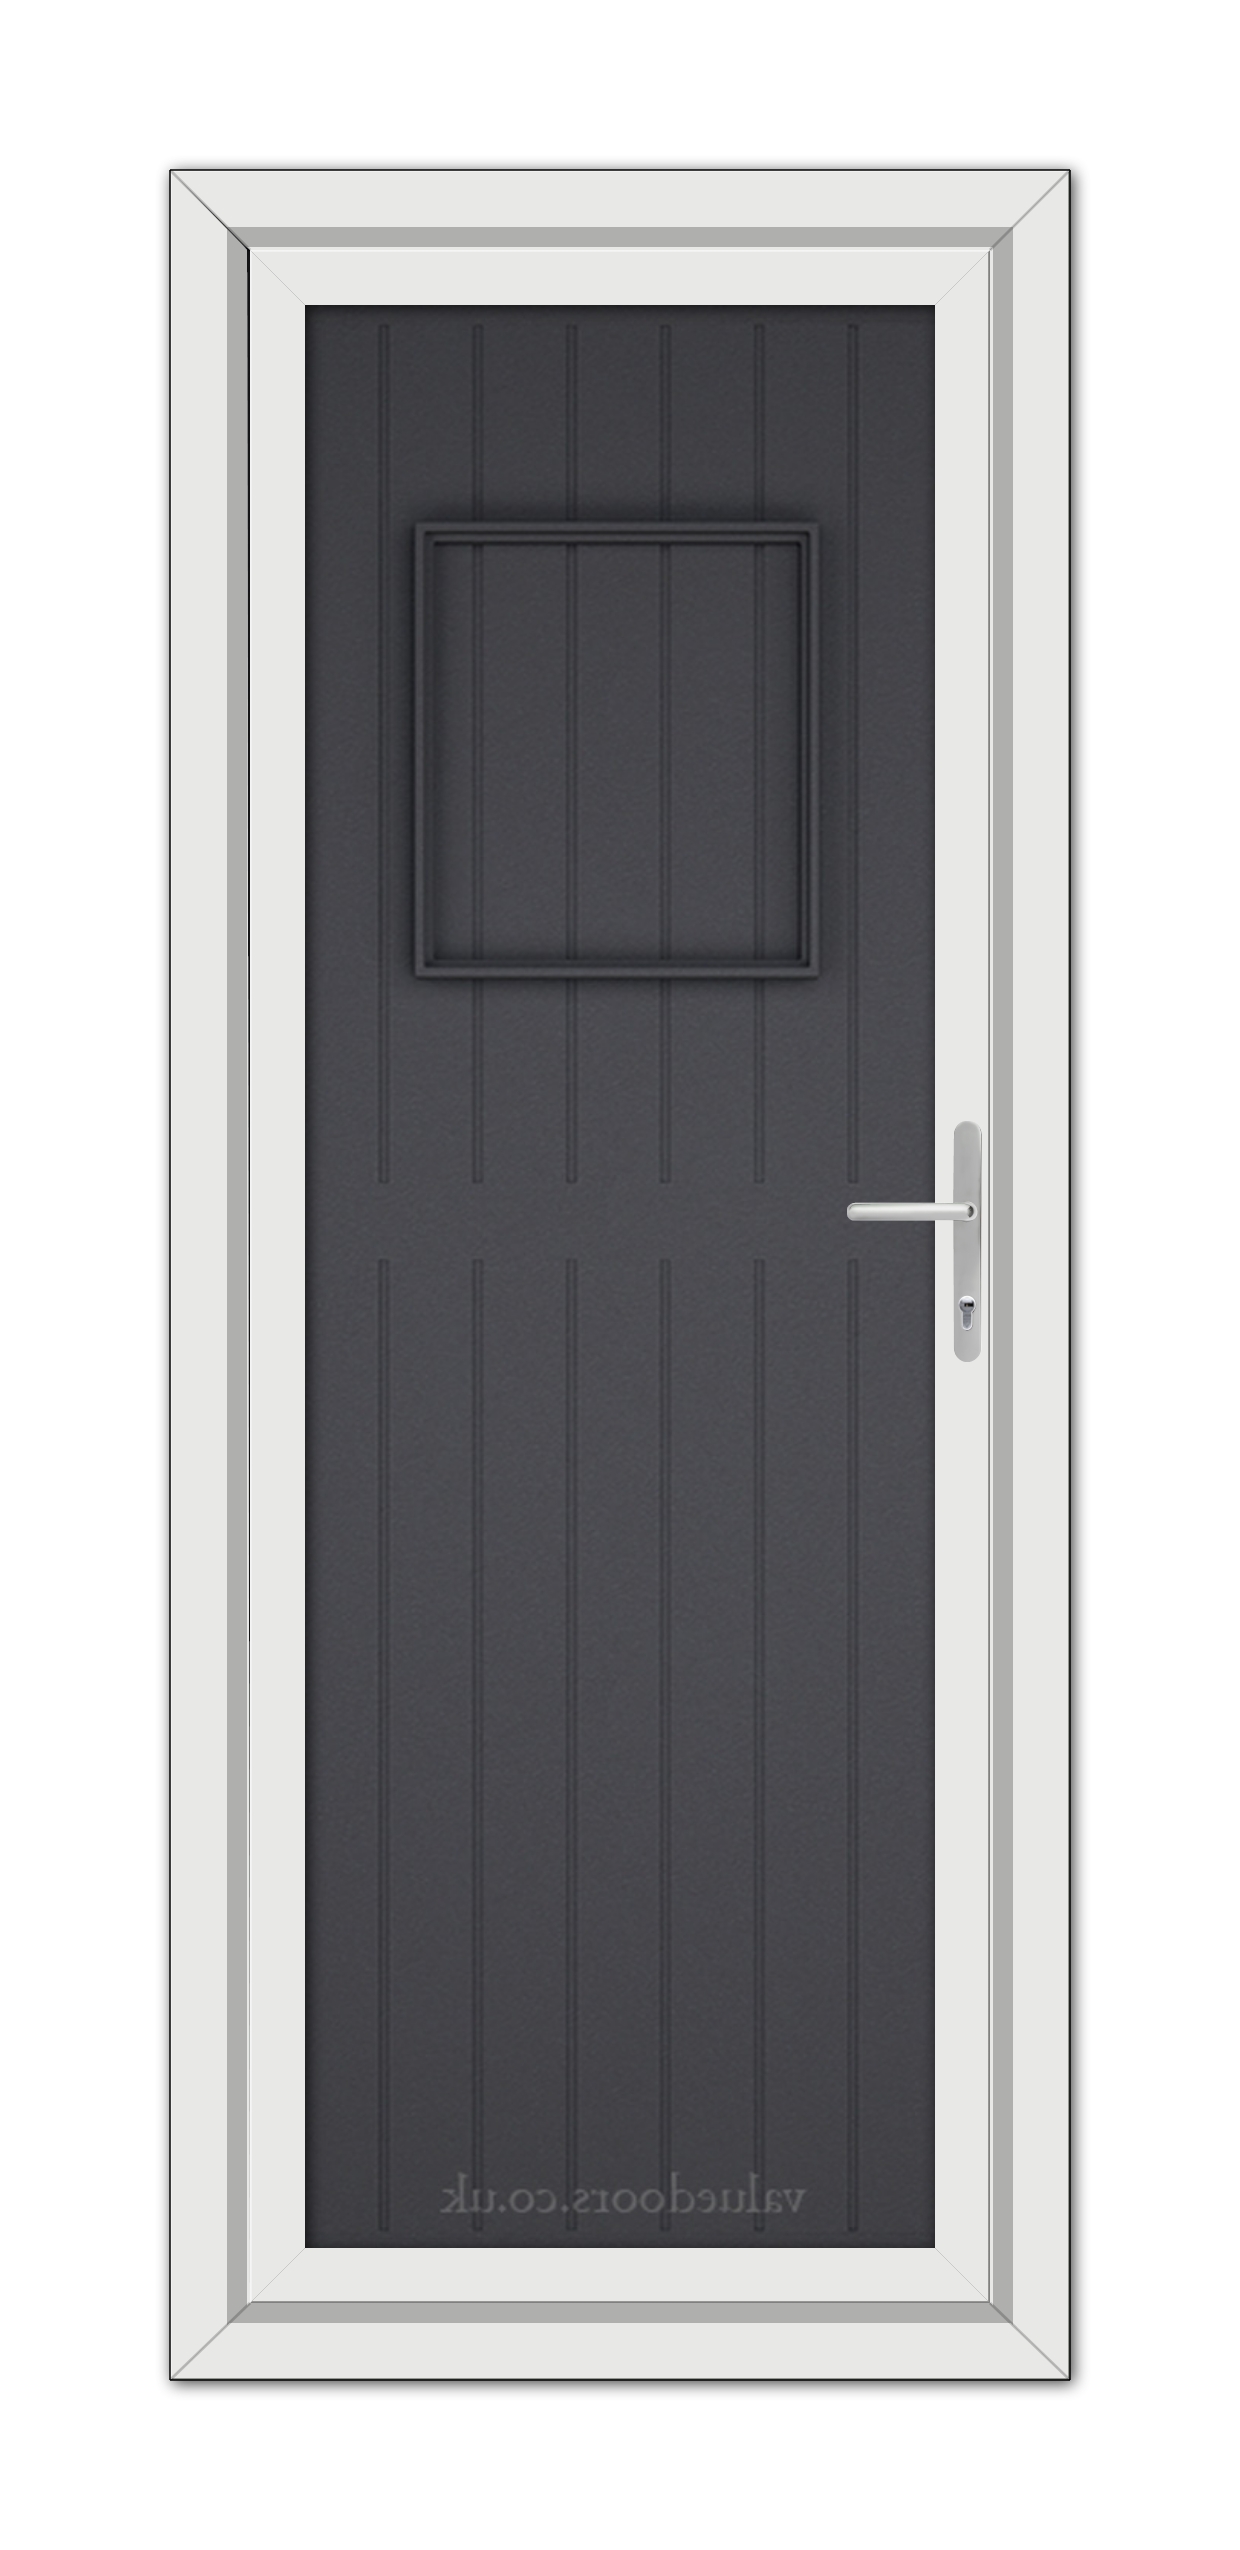 A modern Grey Grained Chatsworth Solid uPVC Door with a top window, set in a white frame, featuring a silver handle on the right.